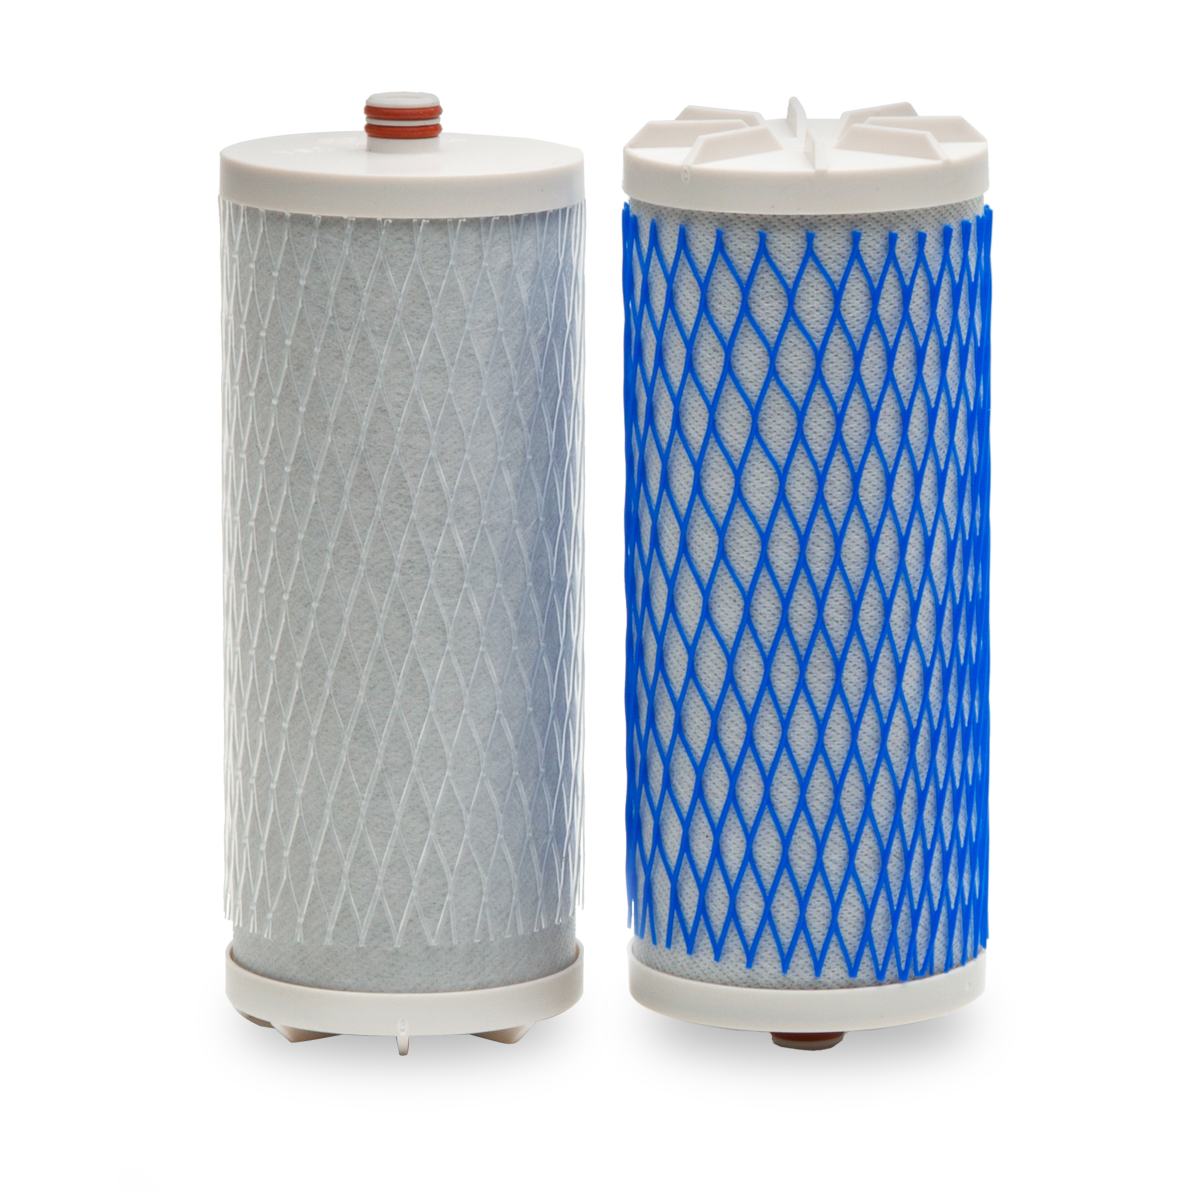 AQ-4035 Countertop Filter Replacements